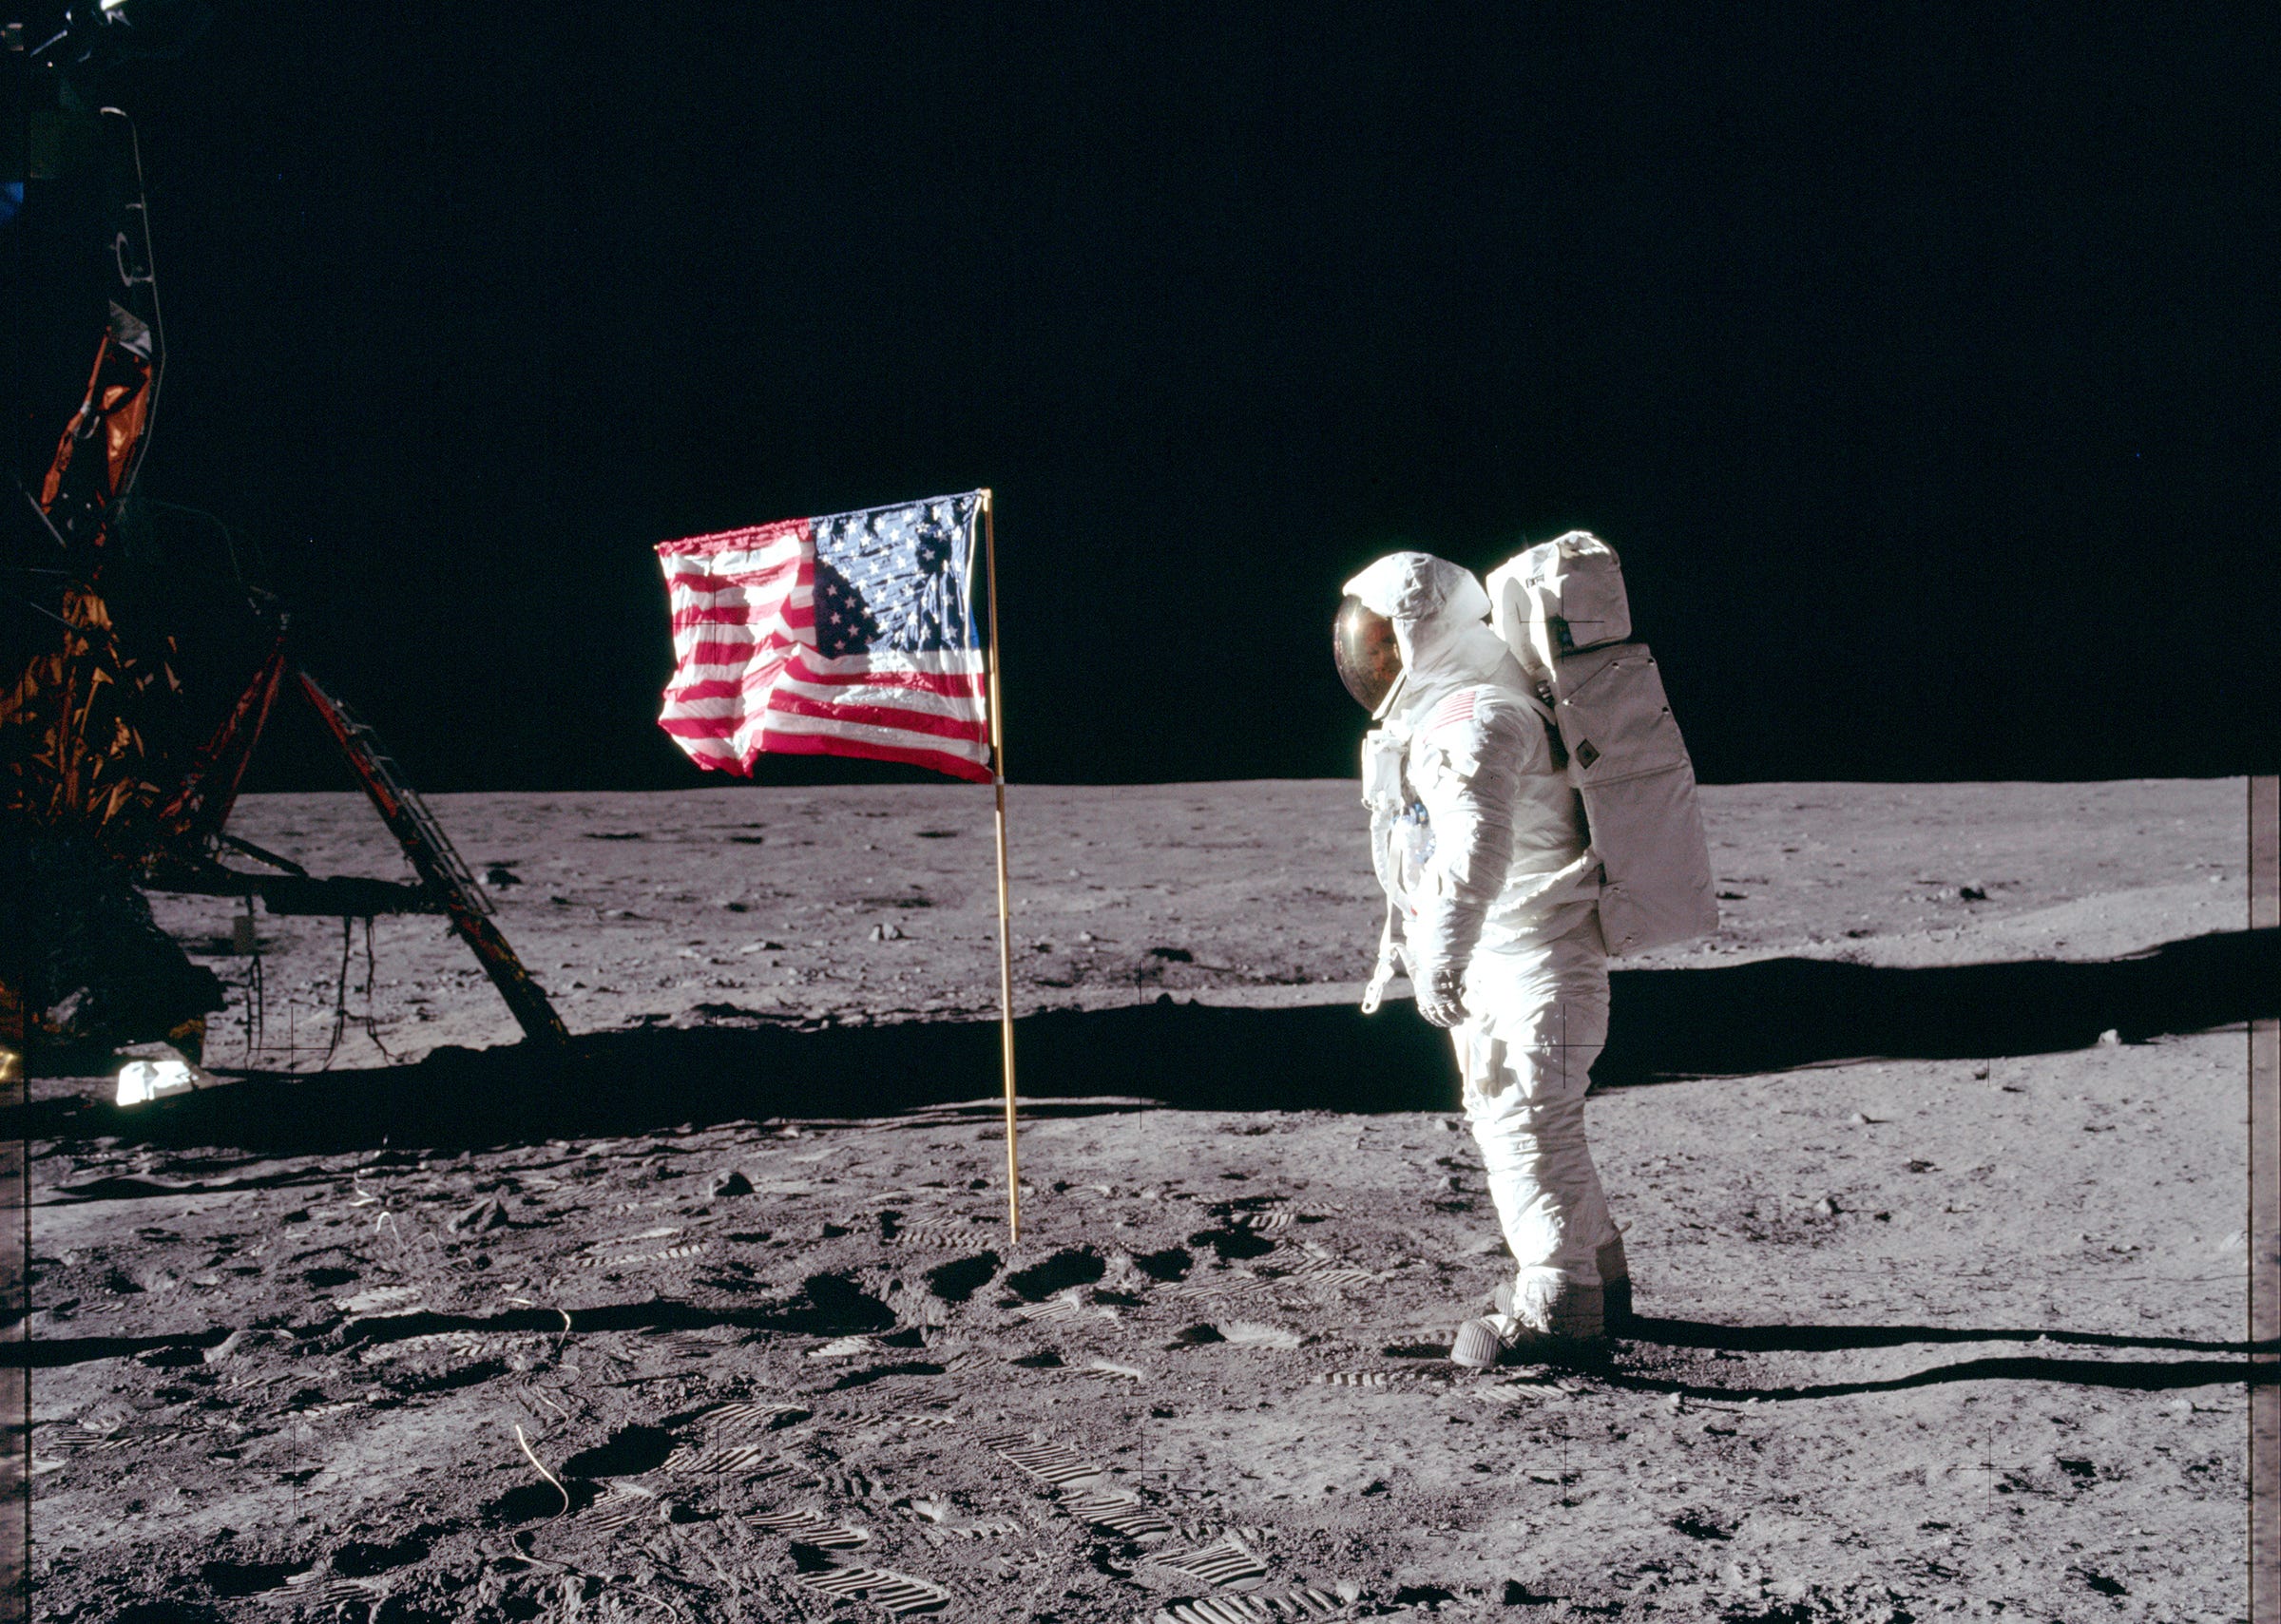 Man on Moon: 'That's One Small Step for Man, One Giant Leap for